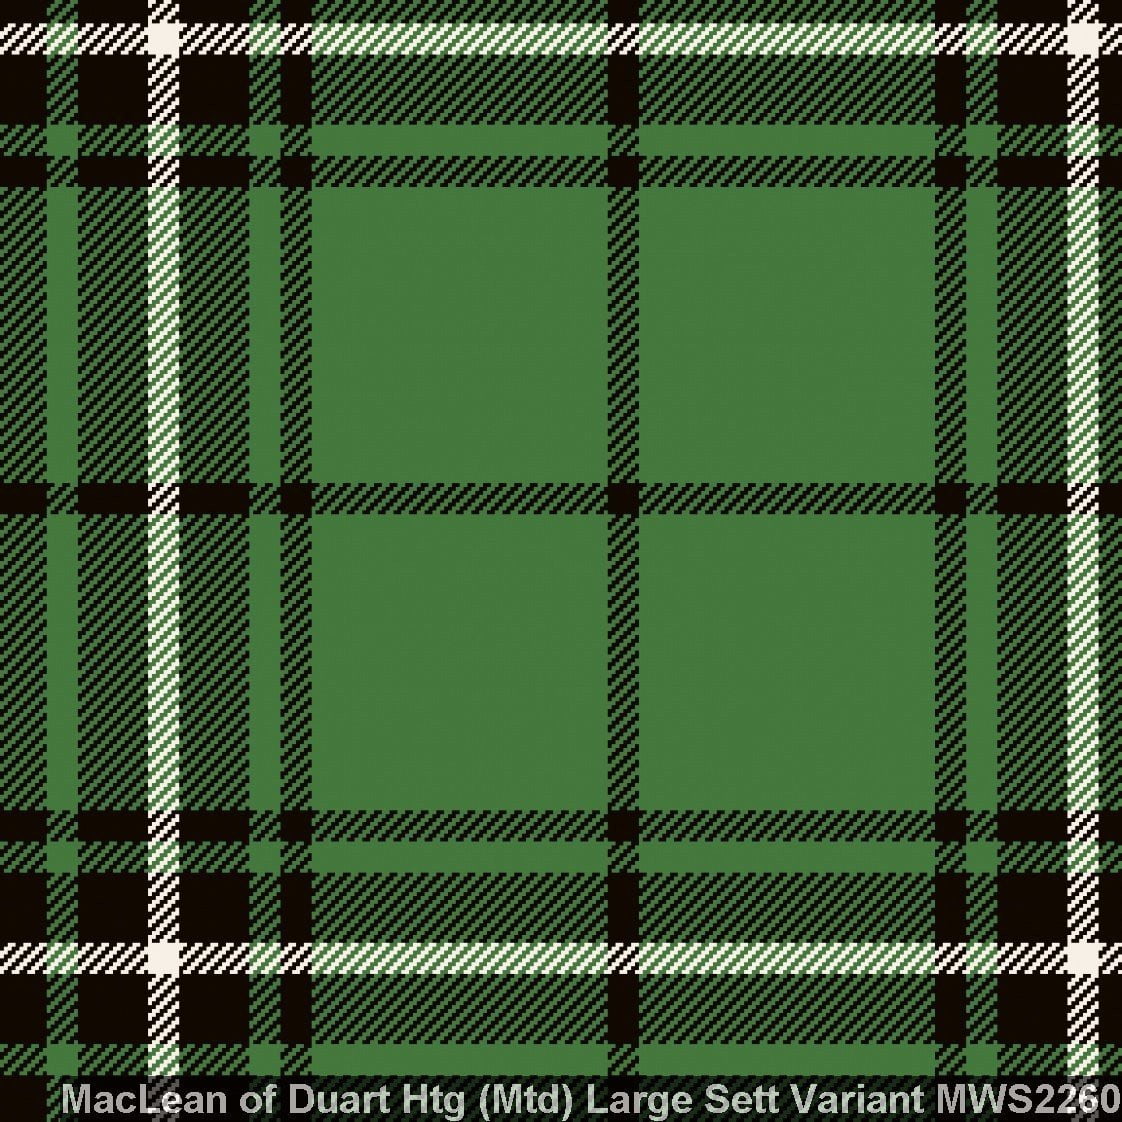 MacLean of Duart Hunting Muted Large Sett Variant